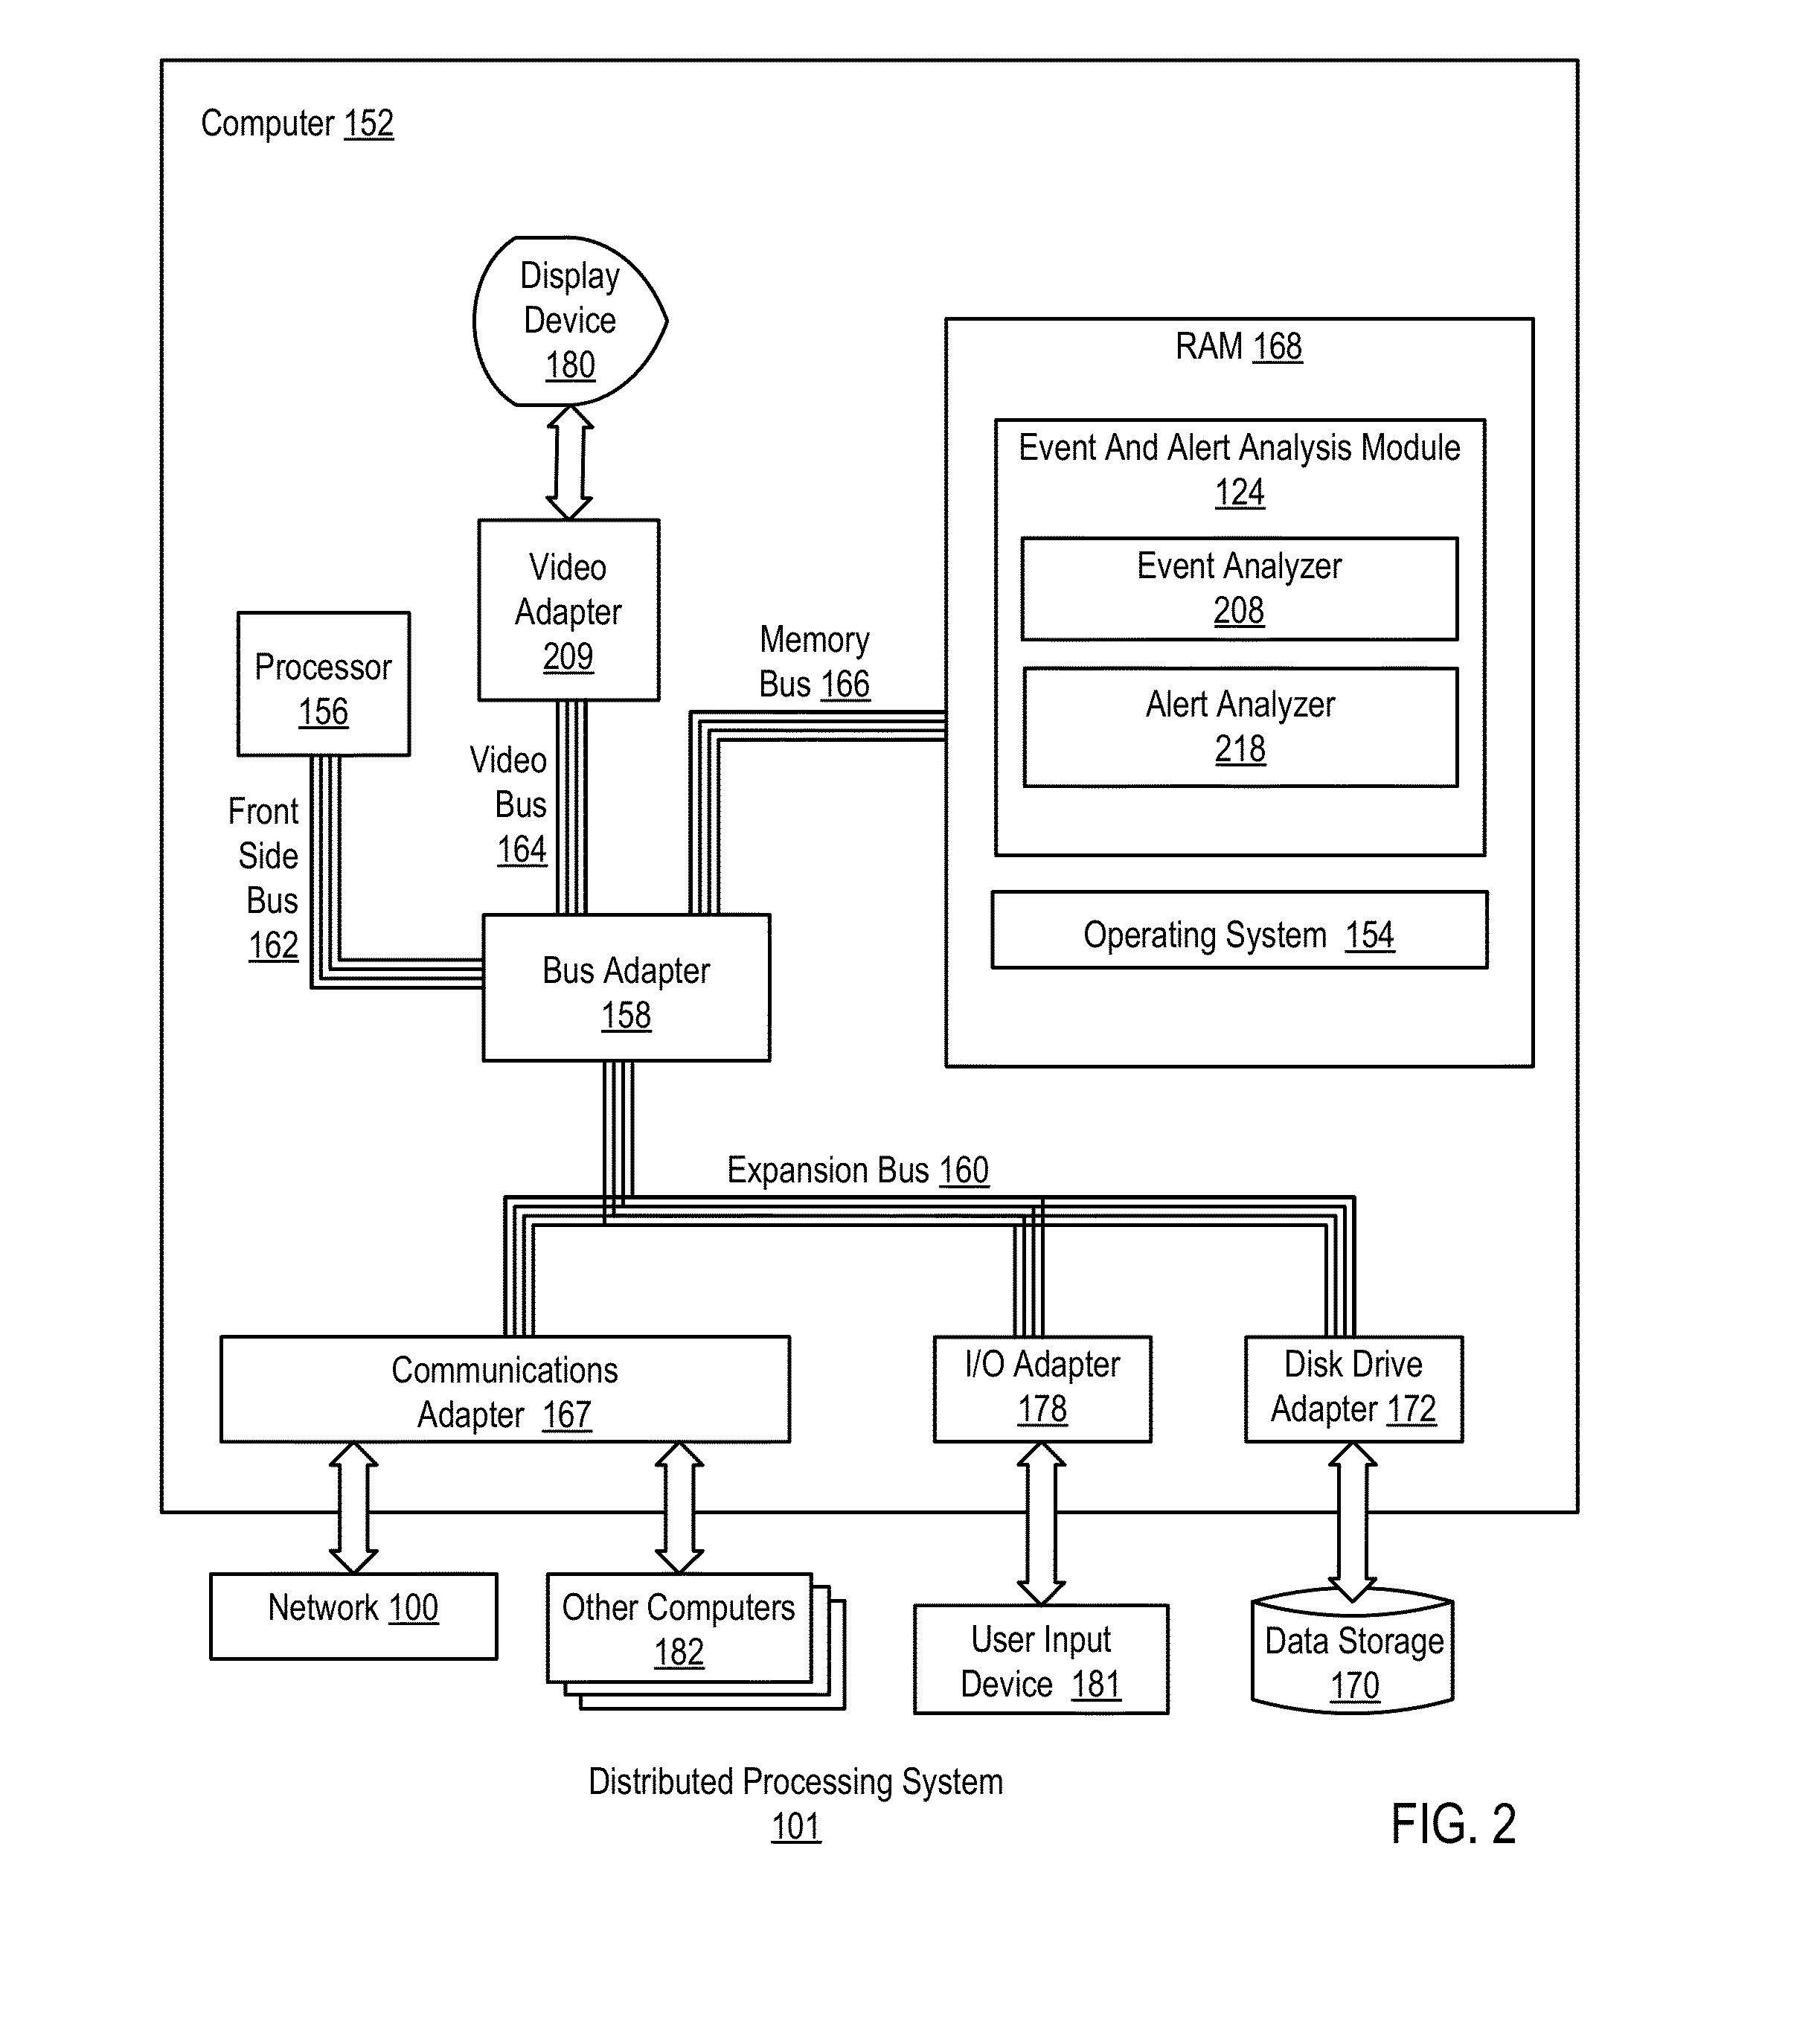 Restarting event and alert analysis after a shutdown in a distributed processing system